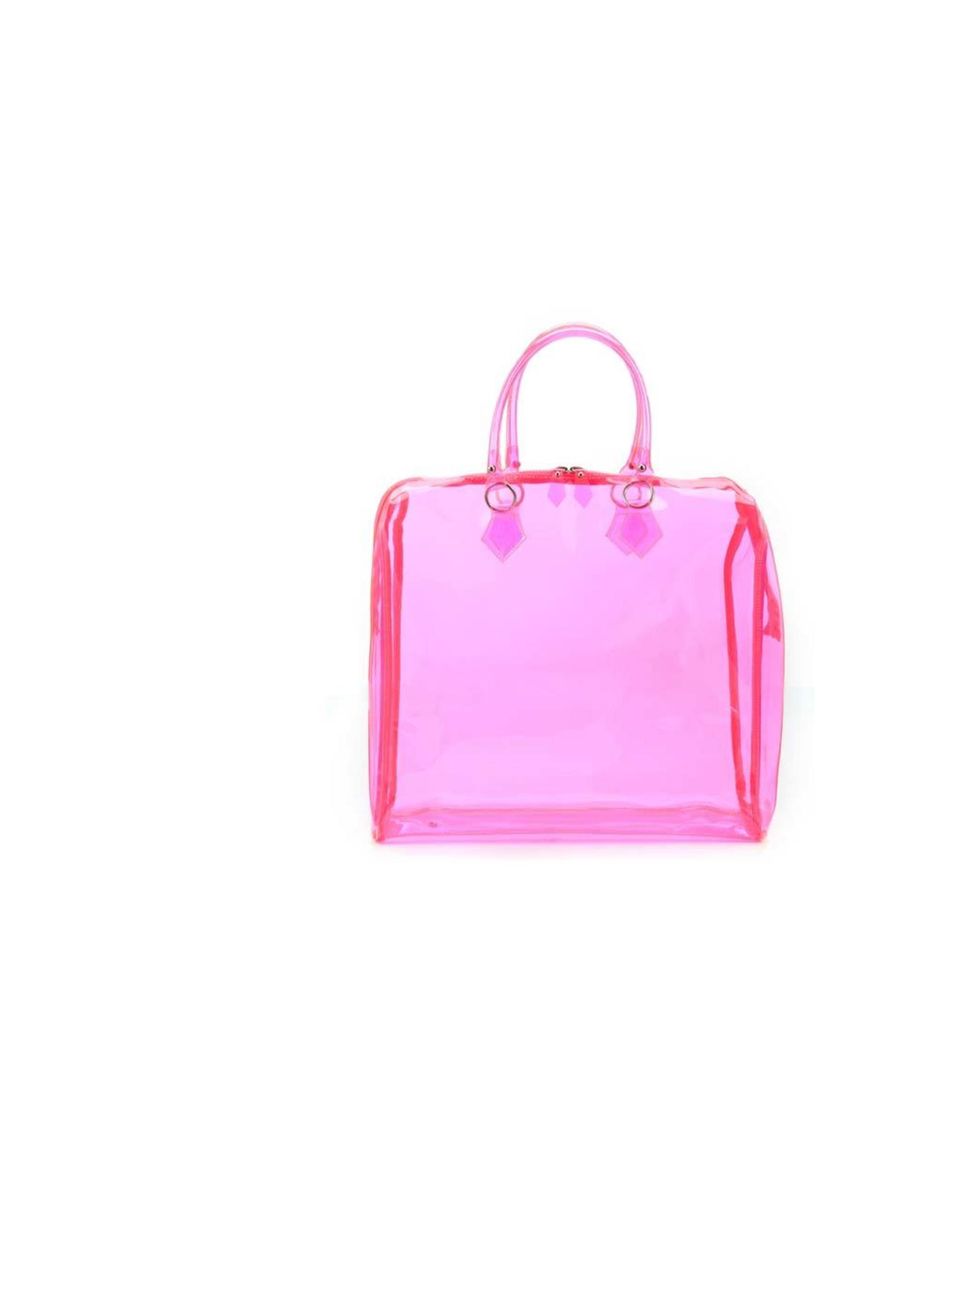 <p>You'll be needing those sunglasses to shield your eyes from this shocking pink number! The top-handle design is a ladylike classic, but the clear vinyl reinvents it in an unexpected and kitsch way... <a href="http://www.newlook.com/shop/womens/bags-and